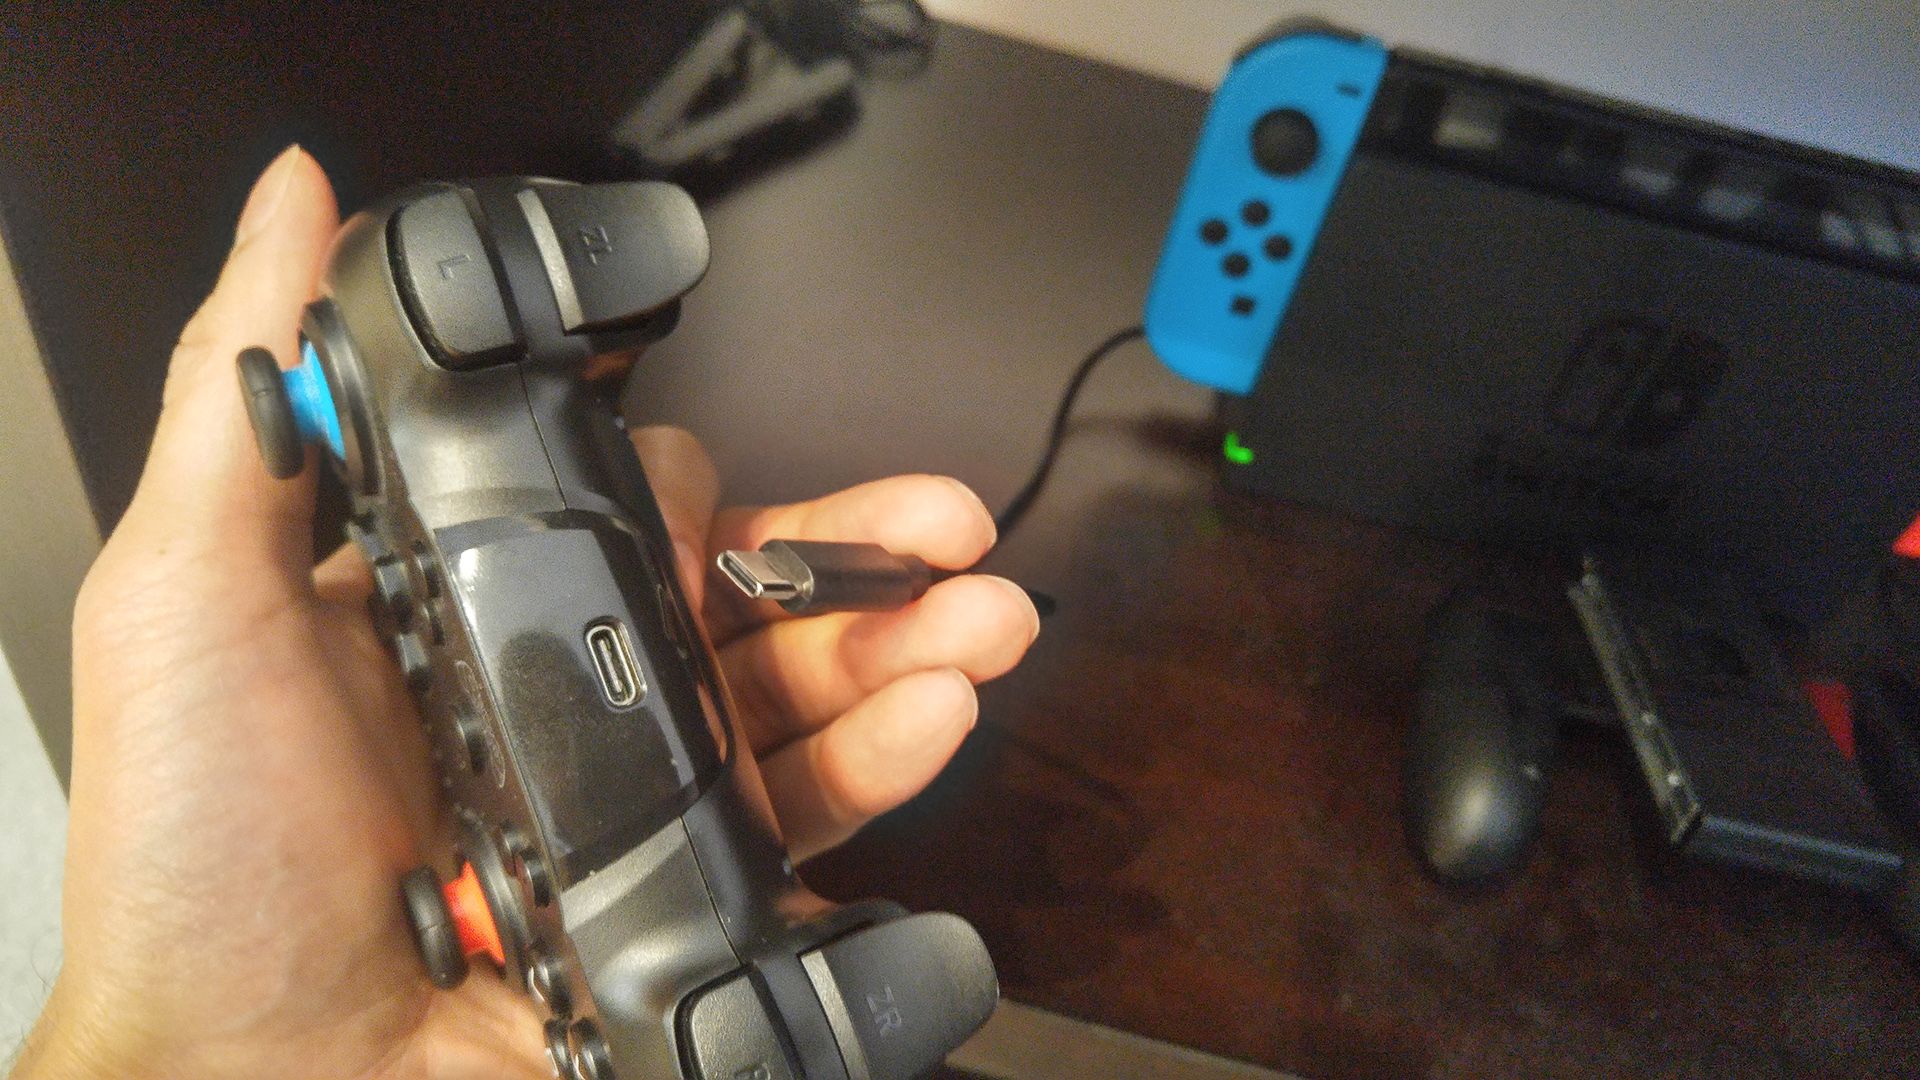 Holding a USB-C cable near the USB-C port of a Nintendo Switch controller.